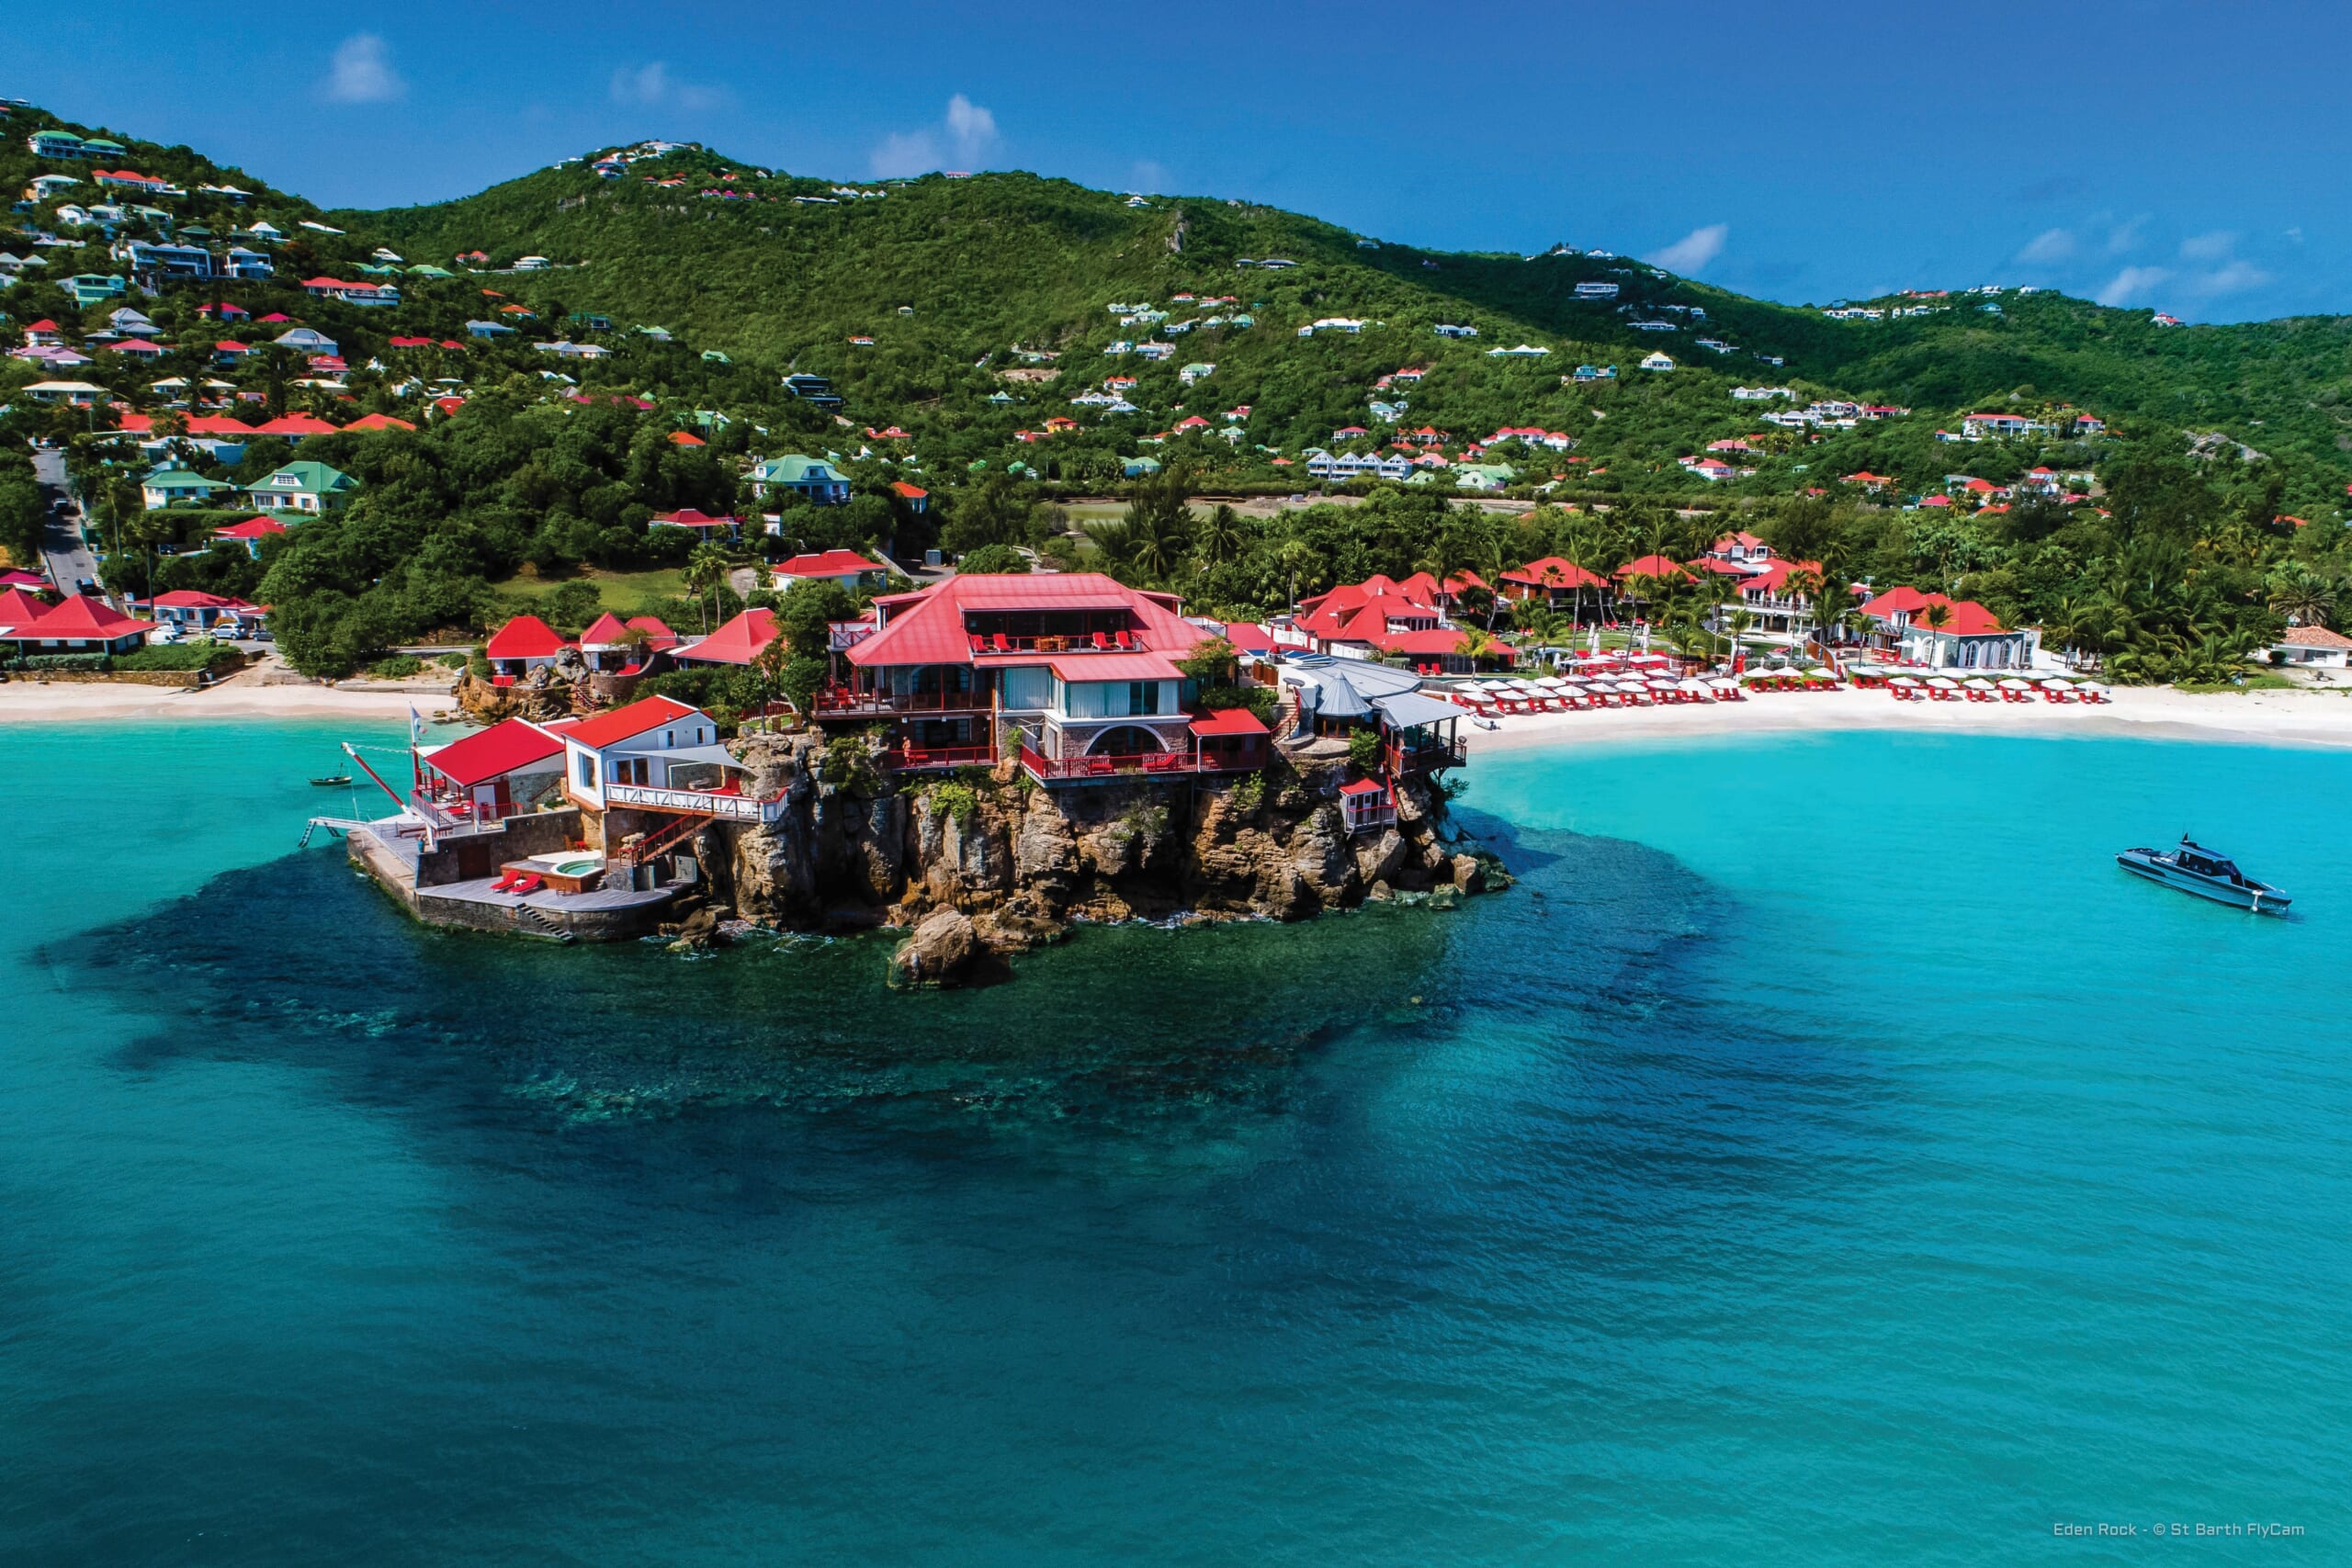 Where to stay in St. Bart's on your next Caribbean vacation